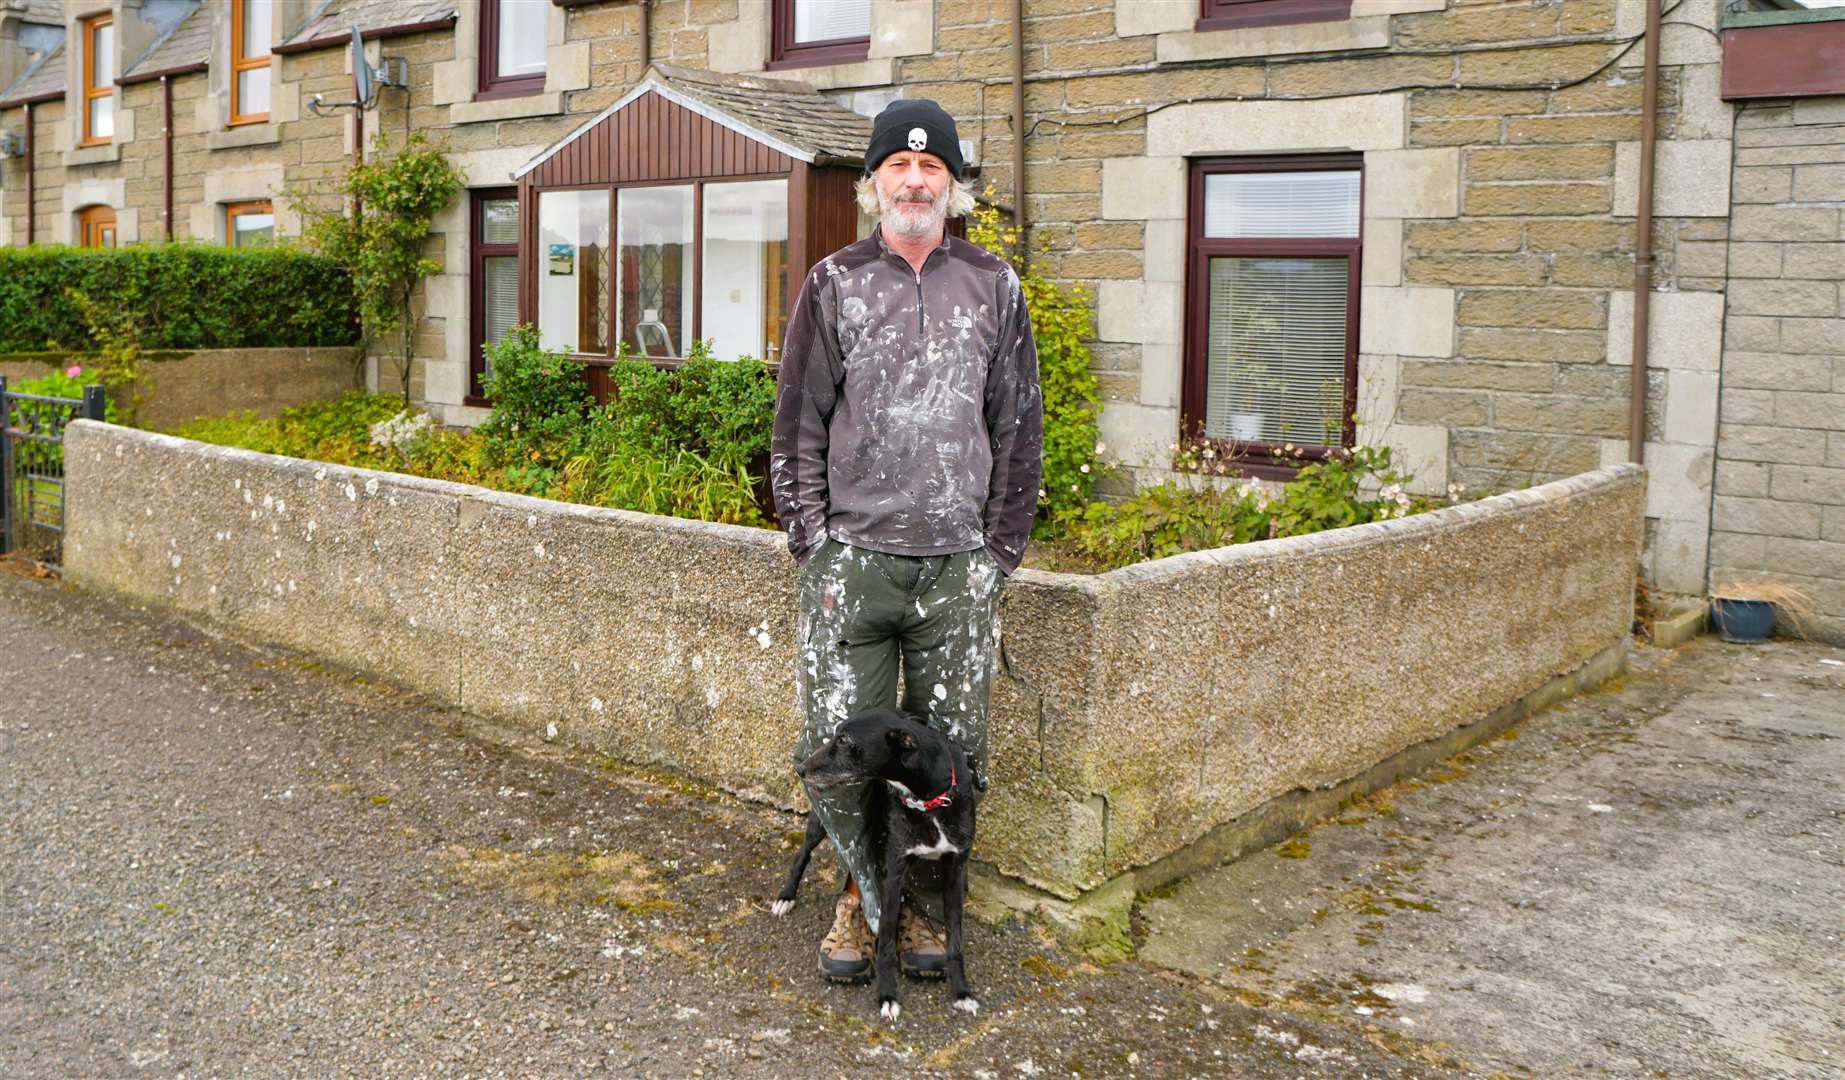 Rick Picken with his dog Smokey who he claims was attacked by one of the Labradors. Picture: DGS